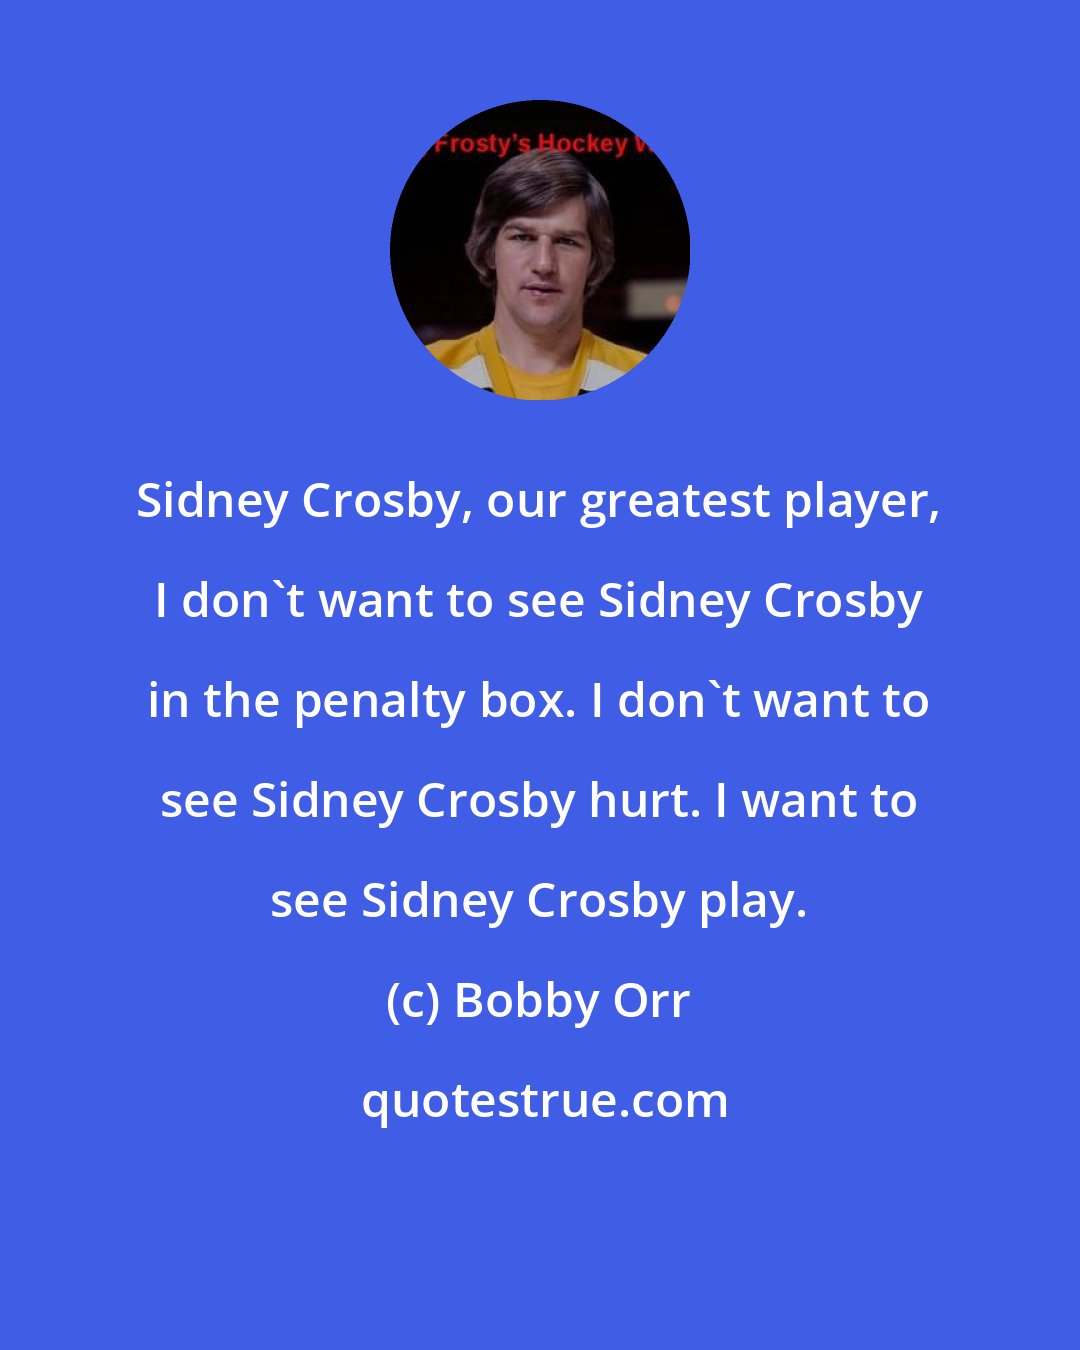 Bobby Orr: Sidney Crosby, our greatest player, I don't want to see Sidney Crosby in the penalty box. I don't want to see Sidney Crosby hurt. I want to see Sidney Crosby play.